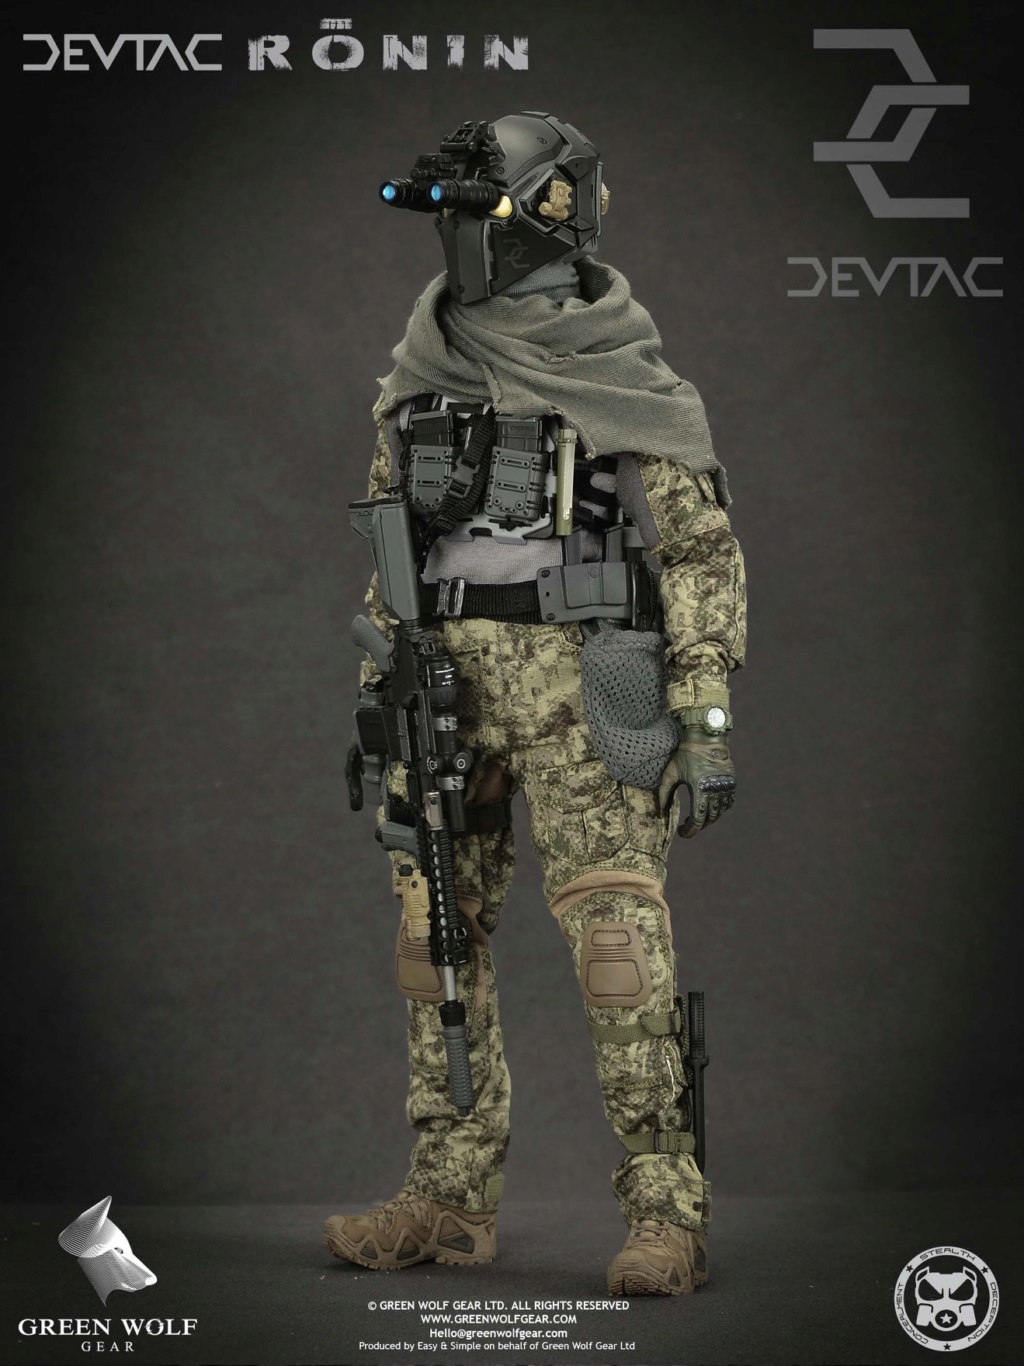 Ronin - NEW PRODUCT: Green Wolf Gear DEVTAC Ronin 1/6 Action Figure (VS2434P) 262